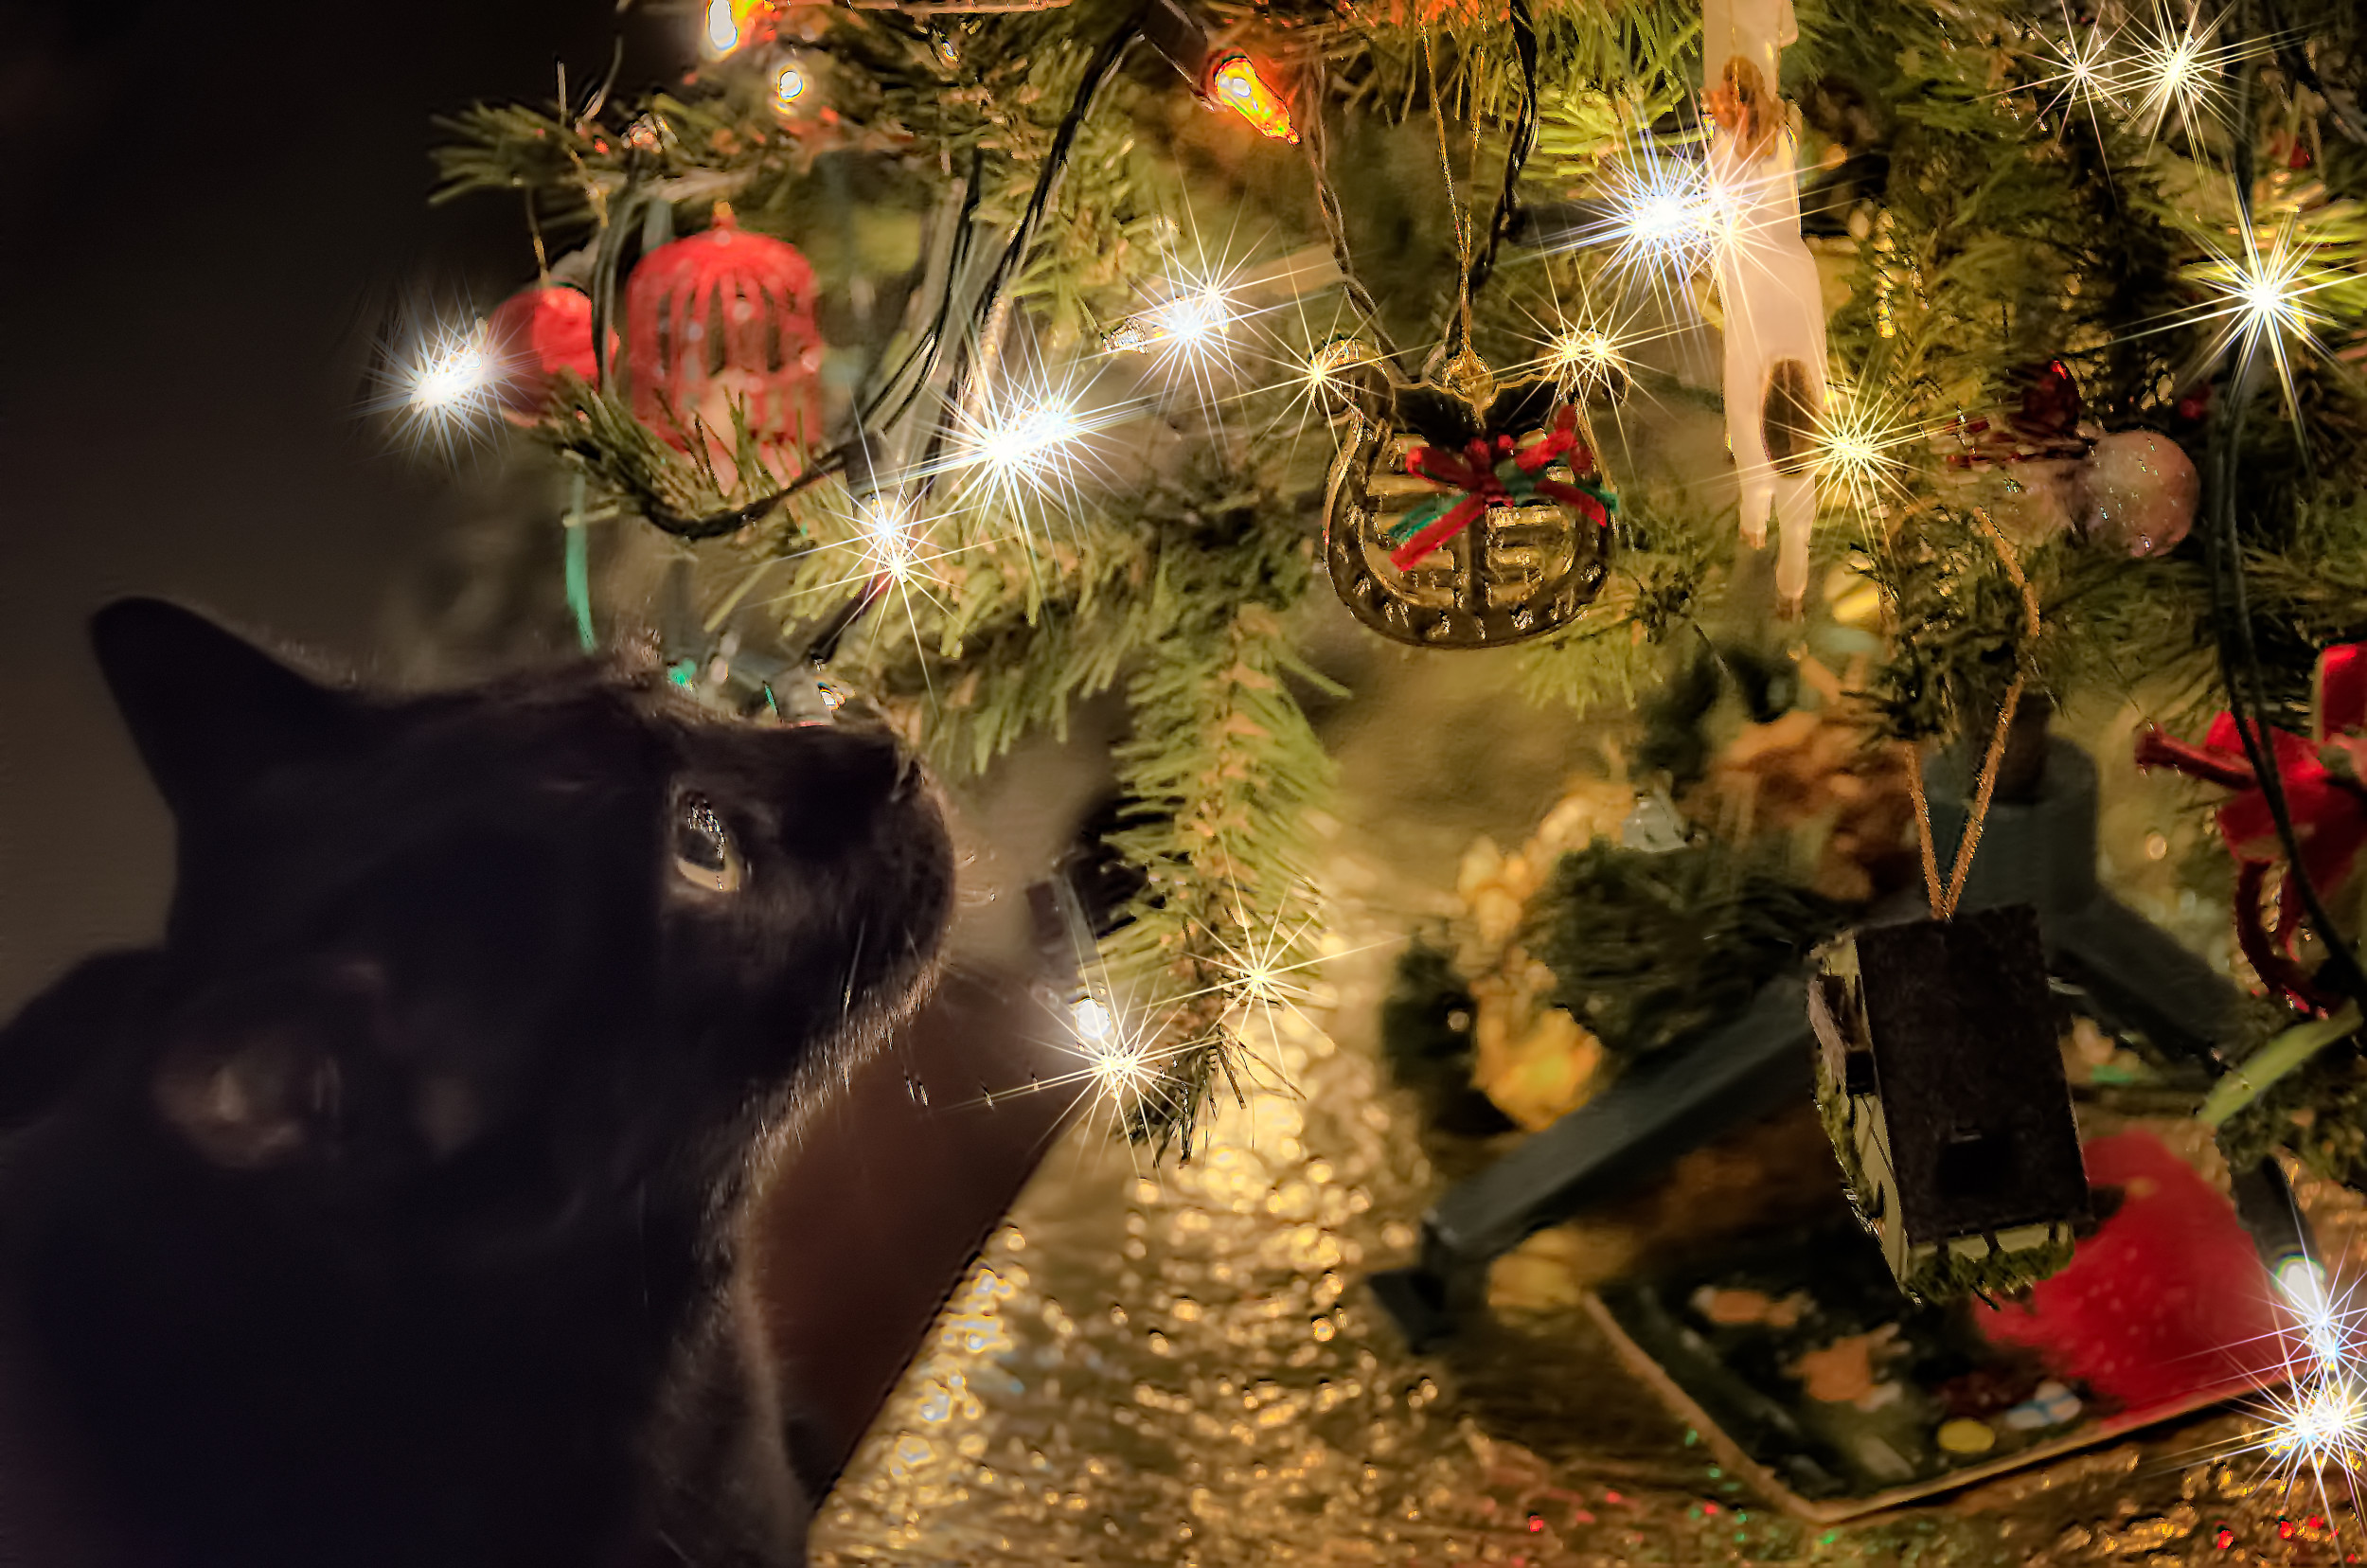 Cat ‘Analyzing’ First Christmas Tree Has Internet in Stitches